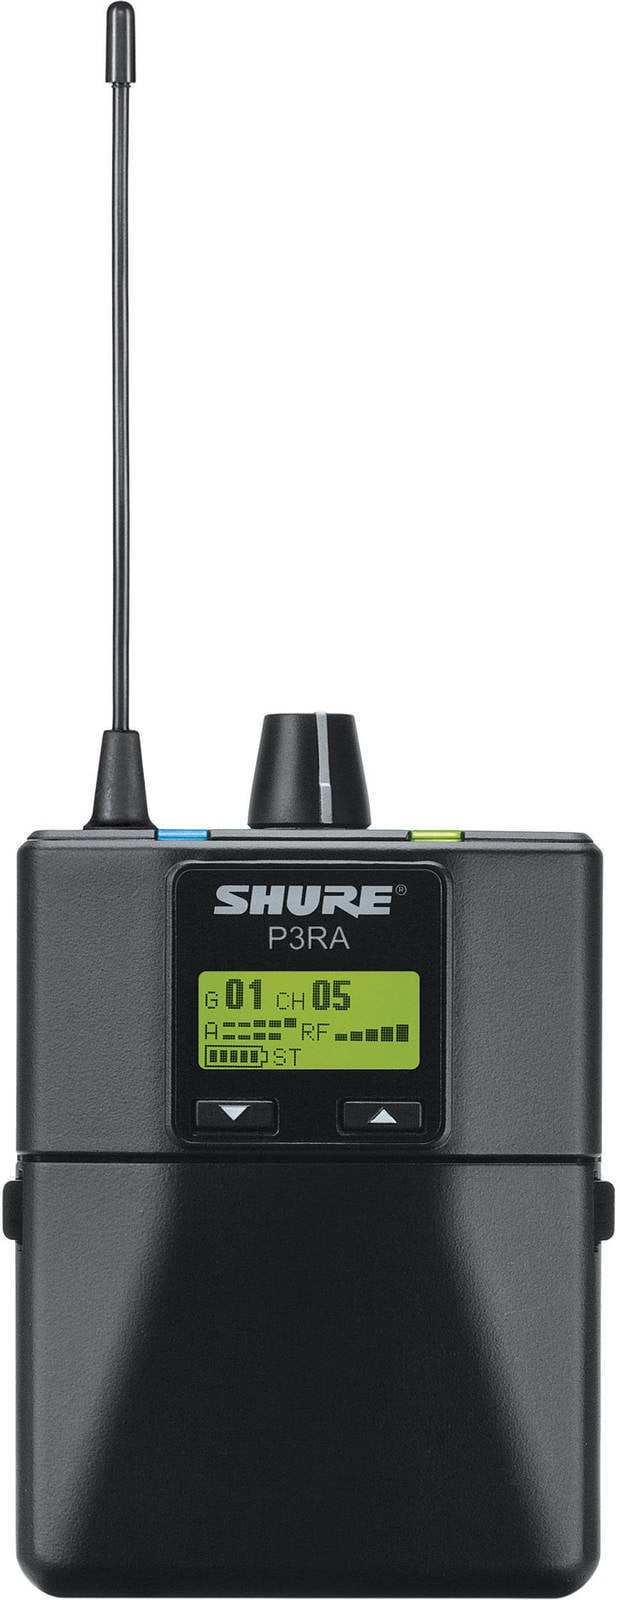 Wireless In-Ear Component Shure P3RA-H20 - PSM 300 Bodypack Receiver H20: 518–542 MHz